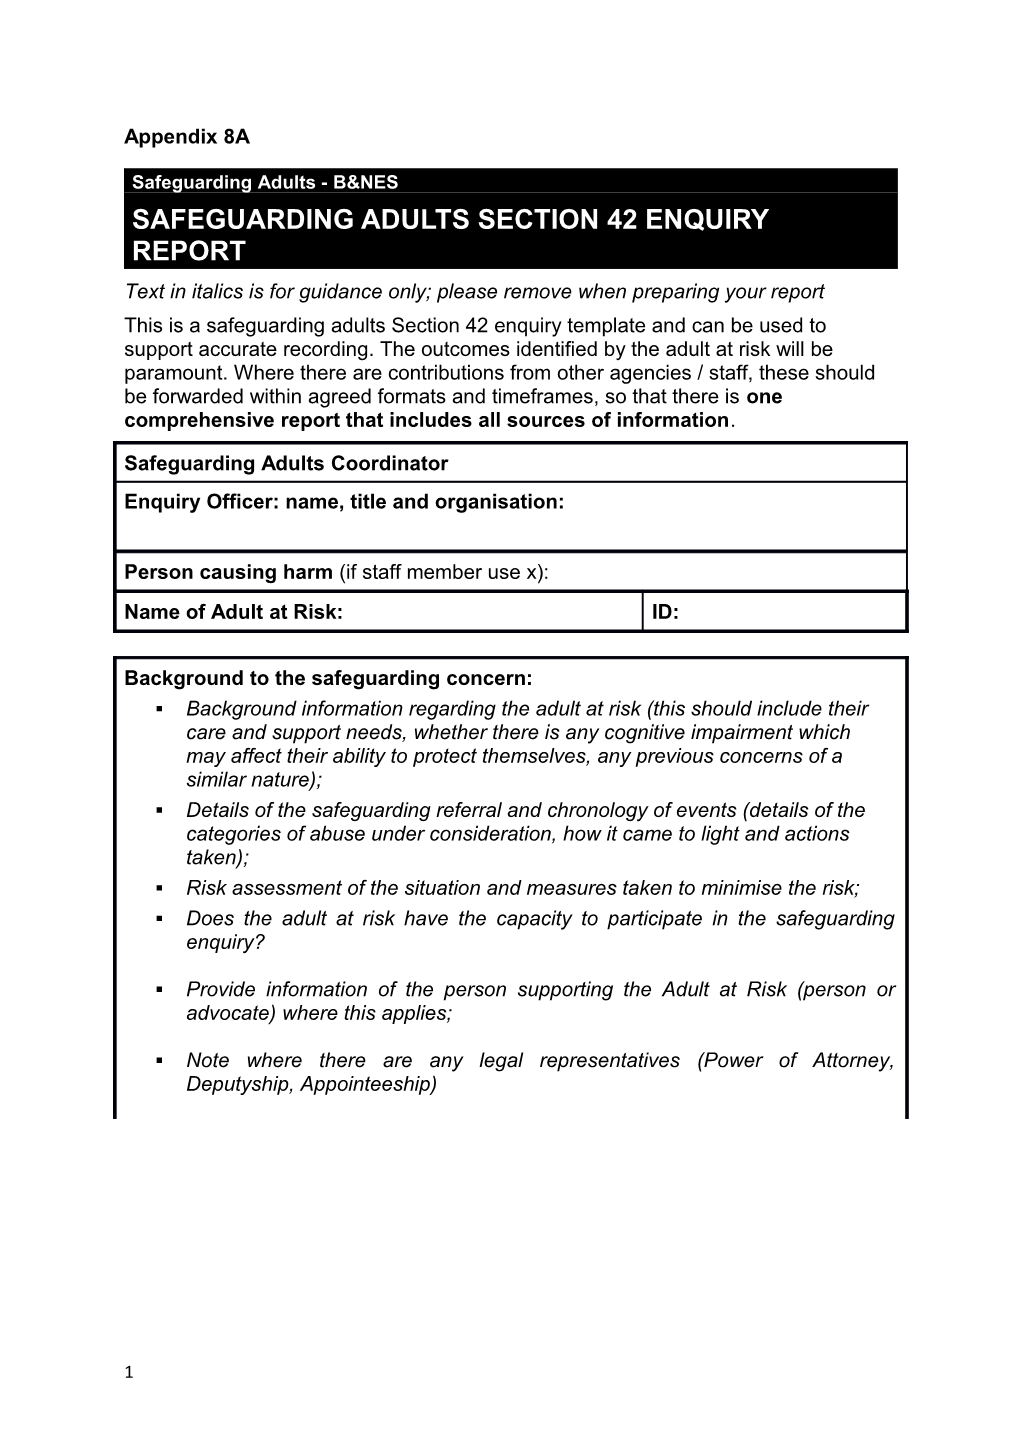 Safeguarding Adults Section 42 Enquiry Report